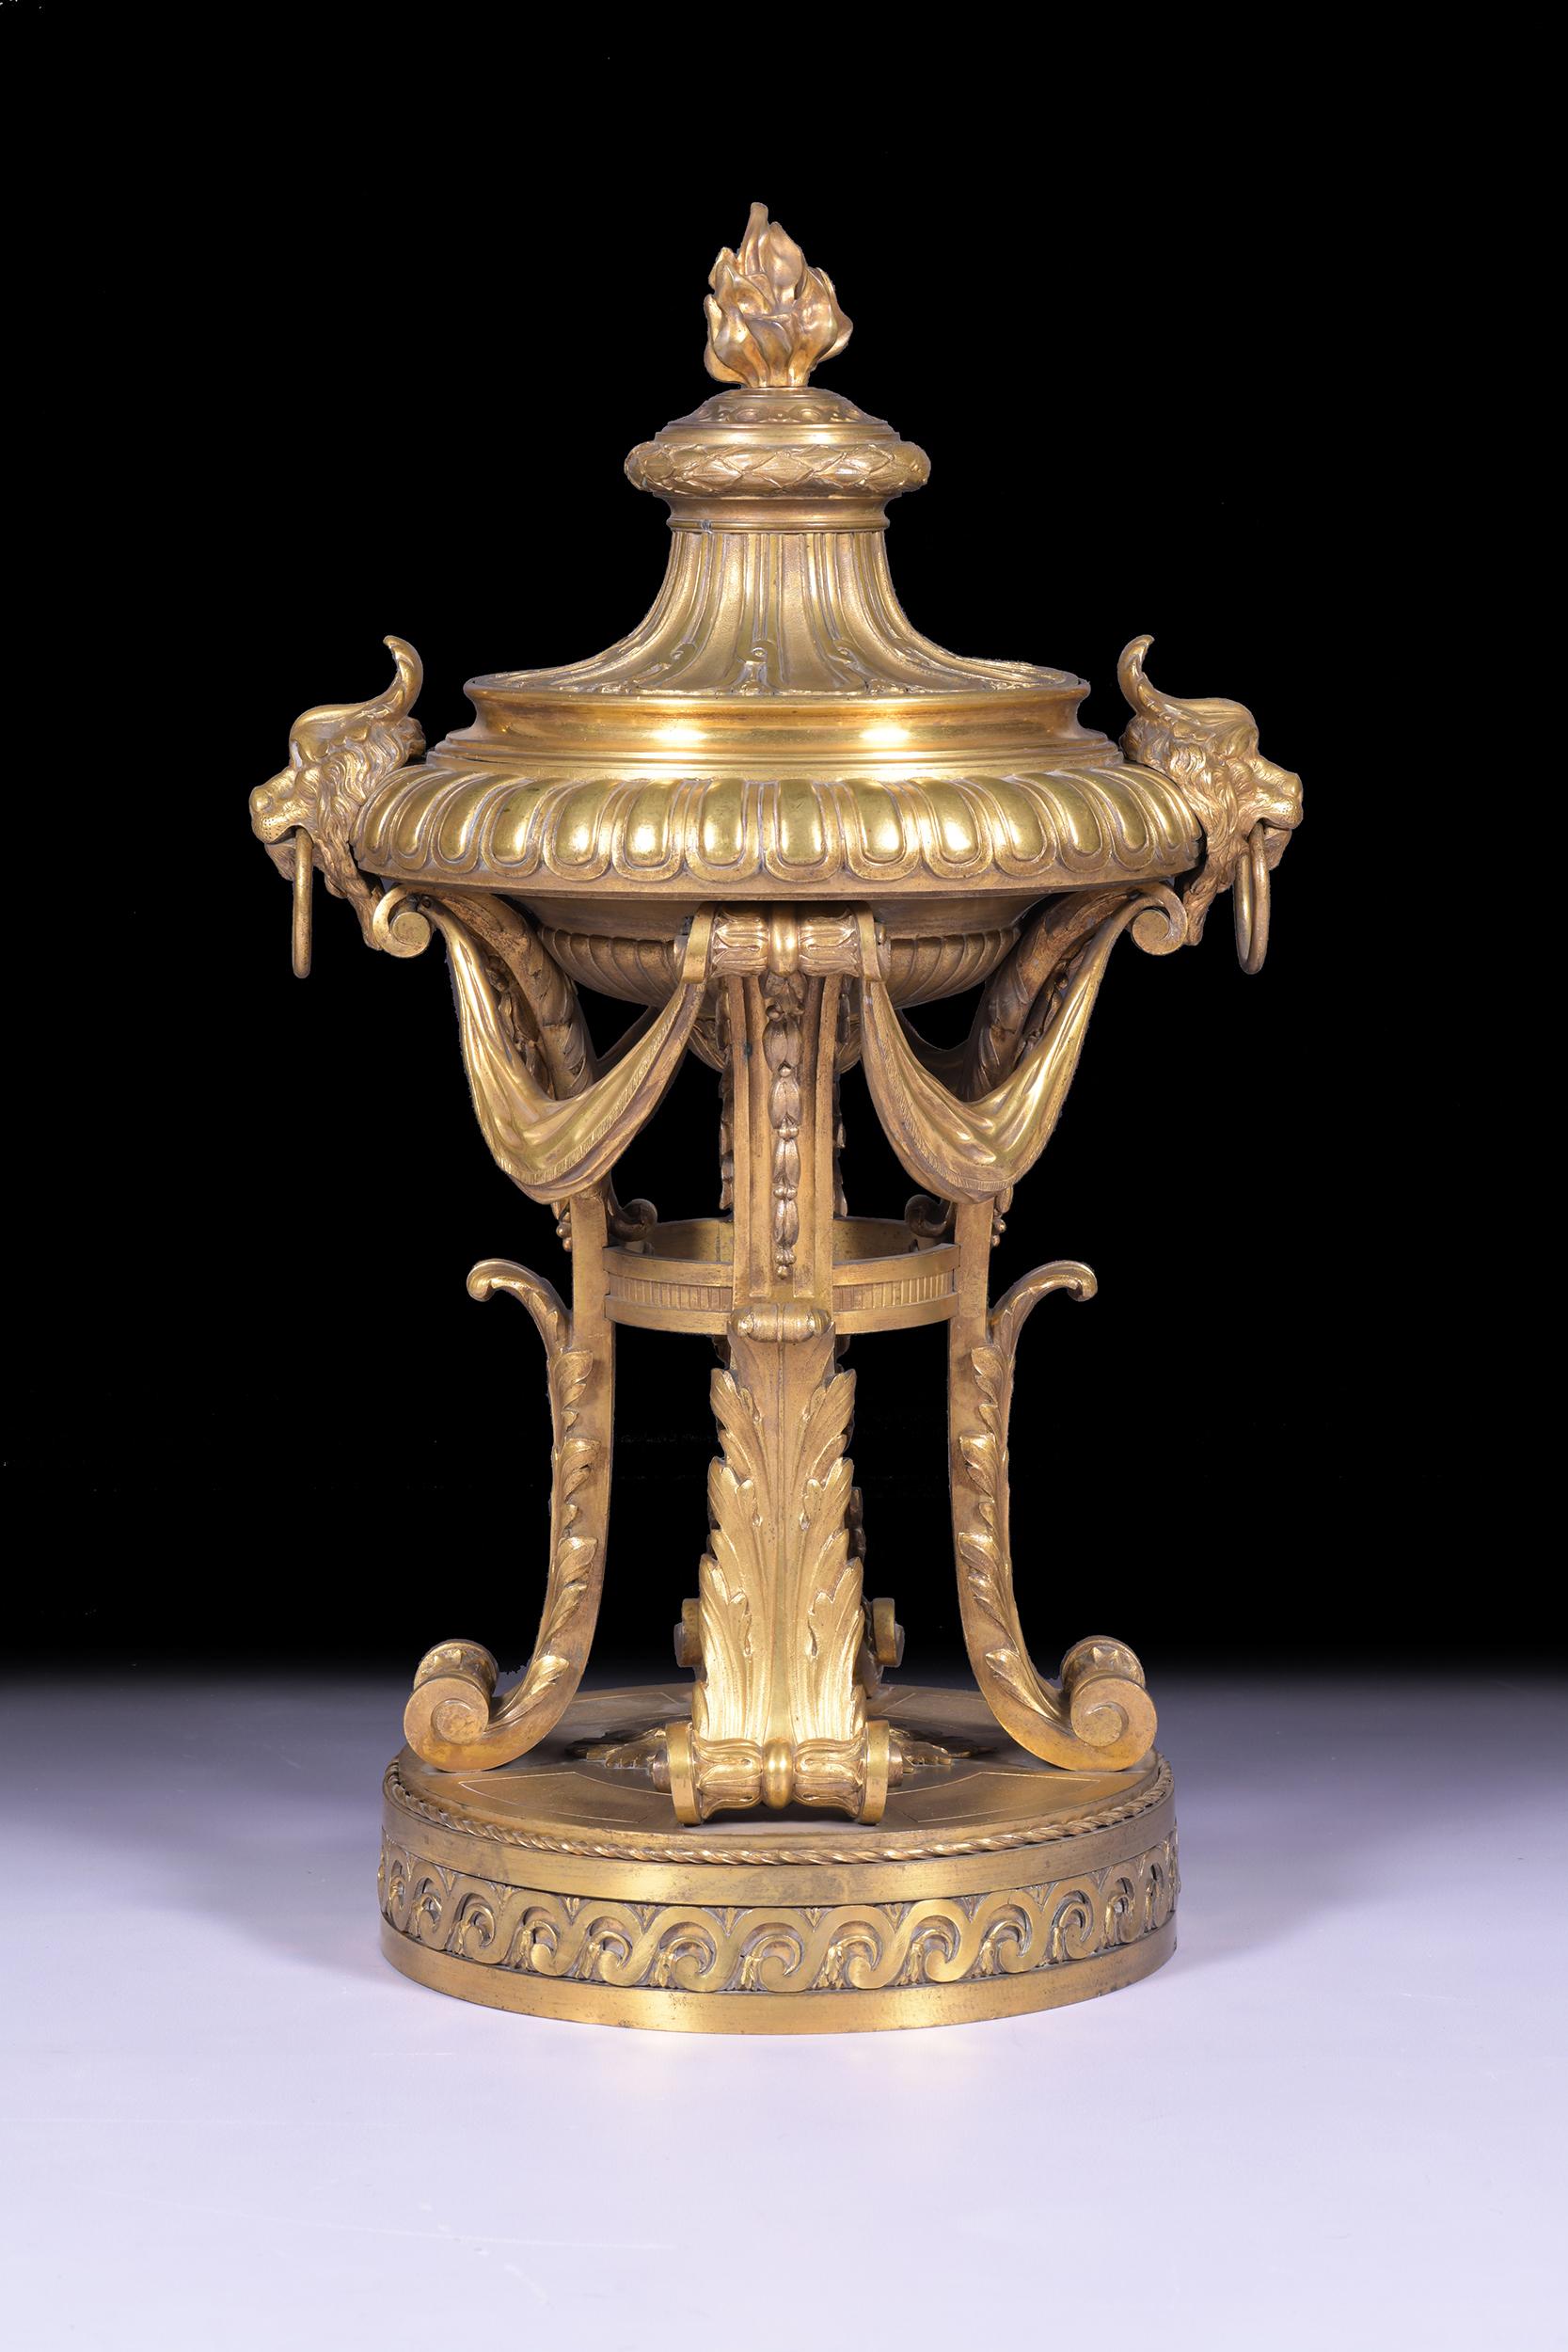 An exceptional quality 19th century Ormolu centre piece in the Louis XVI style. The shallow lobed ogee bowl shaped receiver with lappest cast deep rim below a fluted swept top with laurel wreath border with flambeau finial cover, raised on acanthus